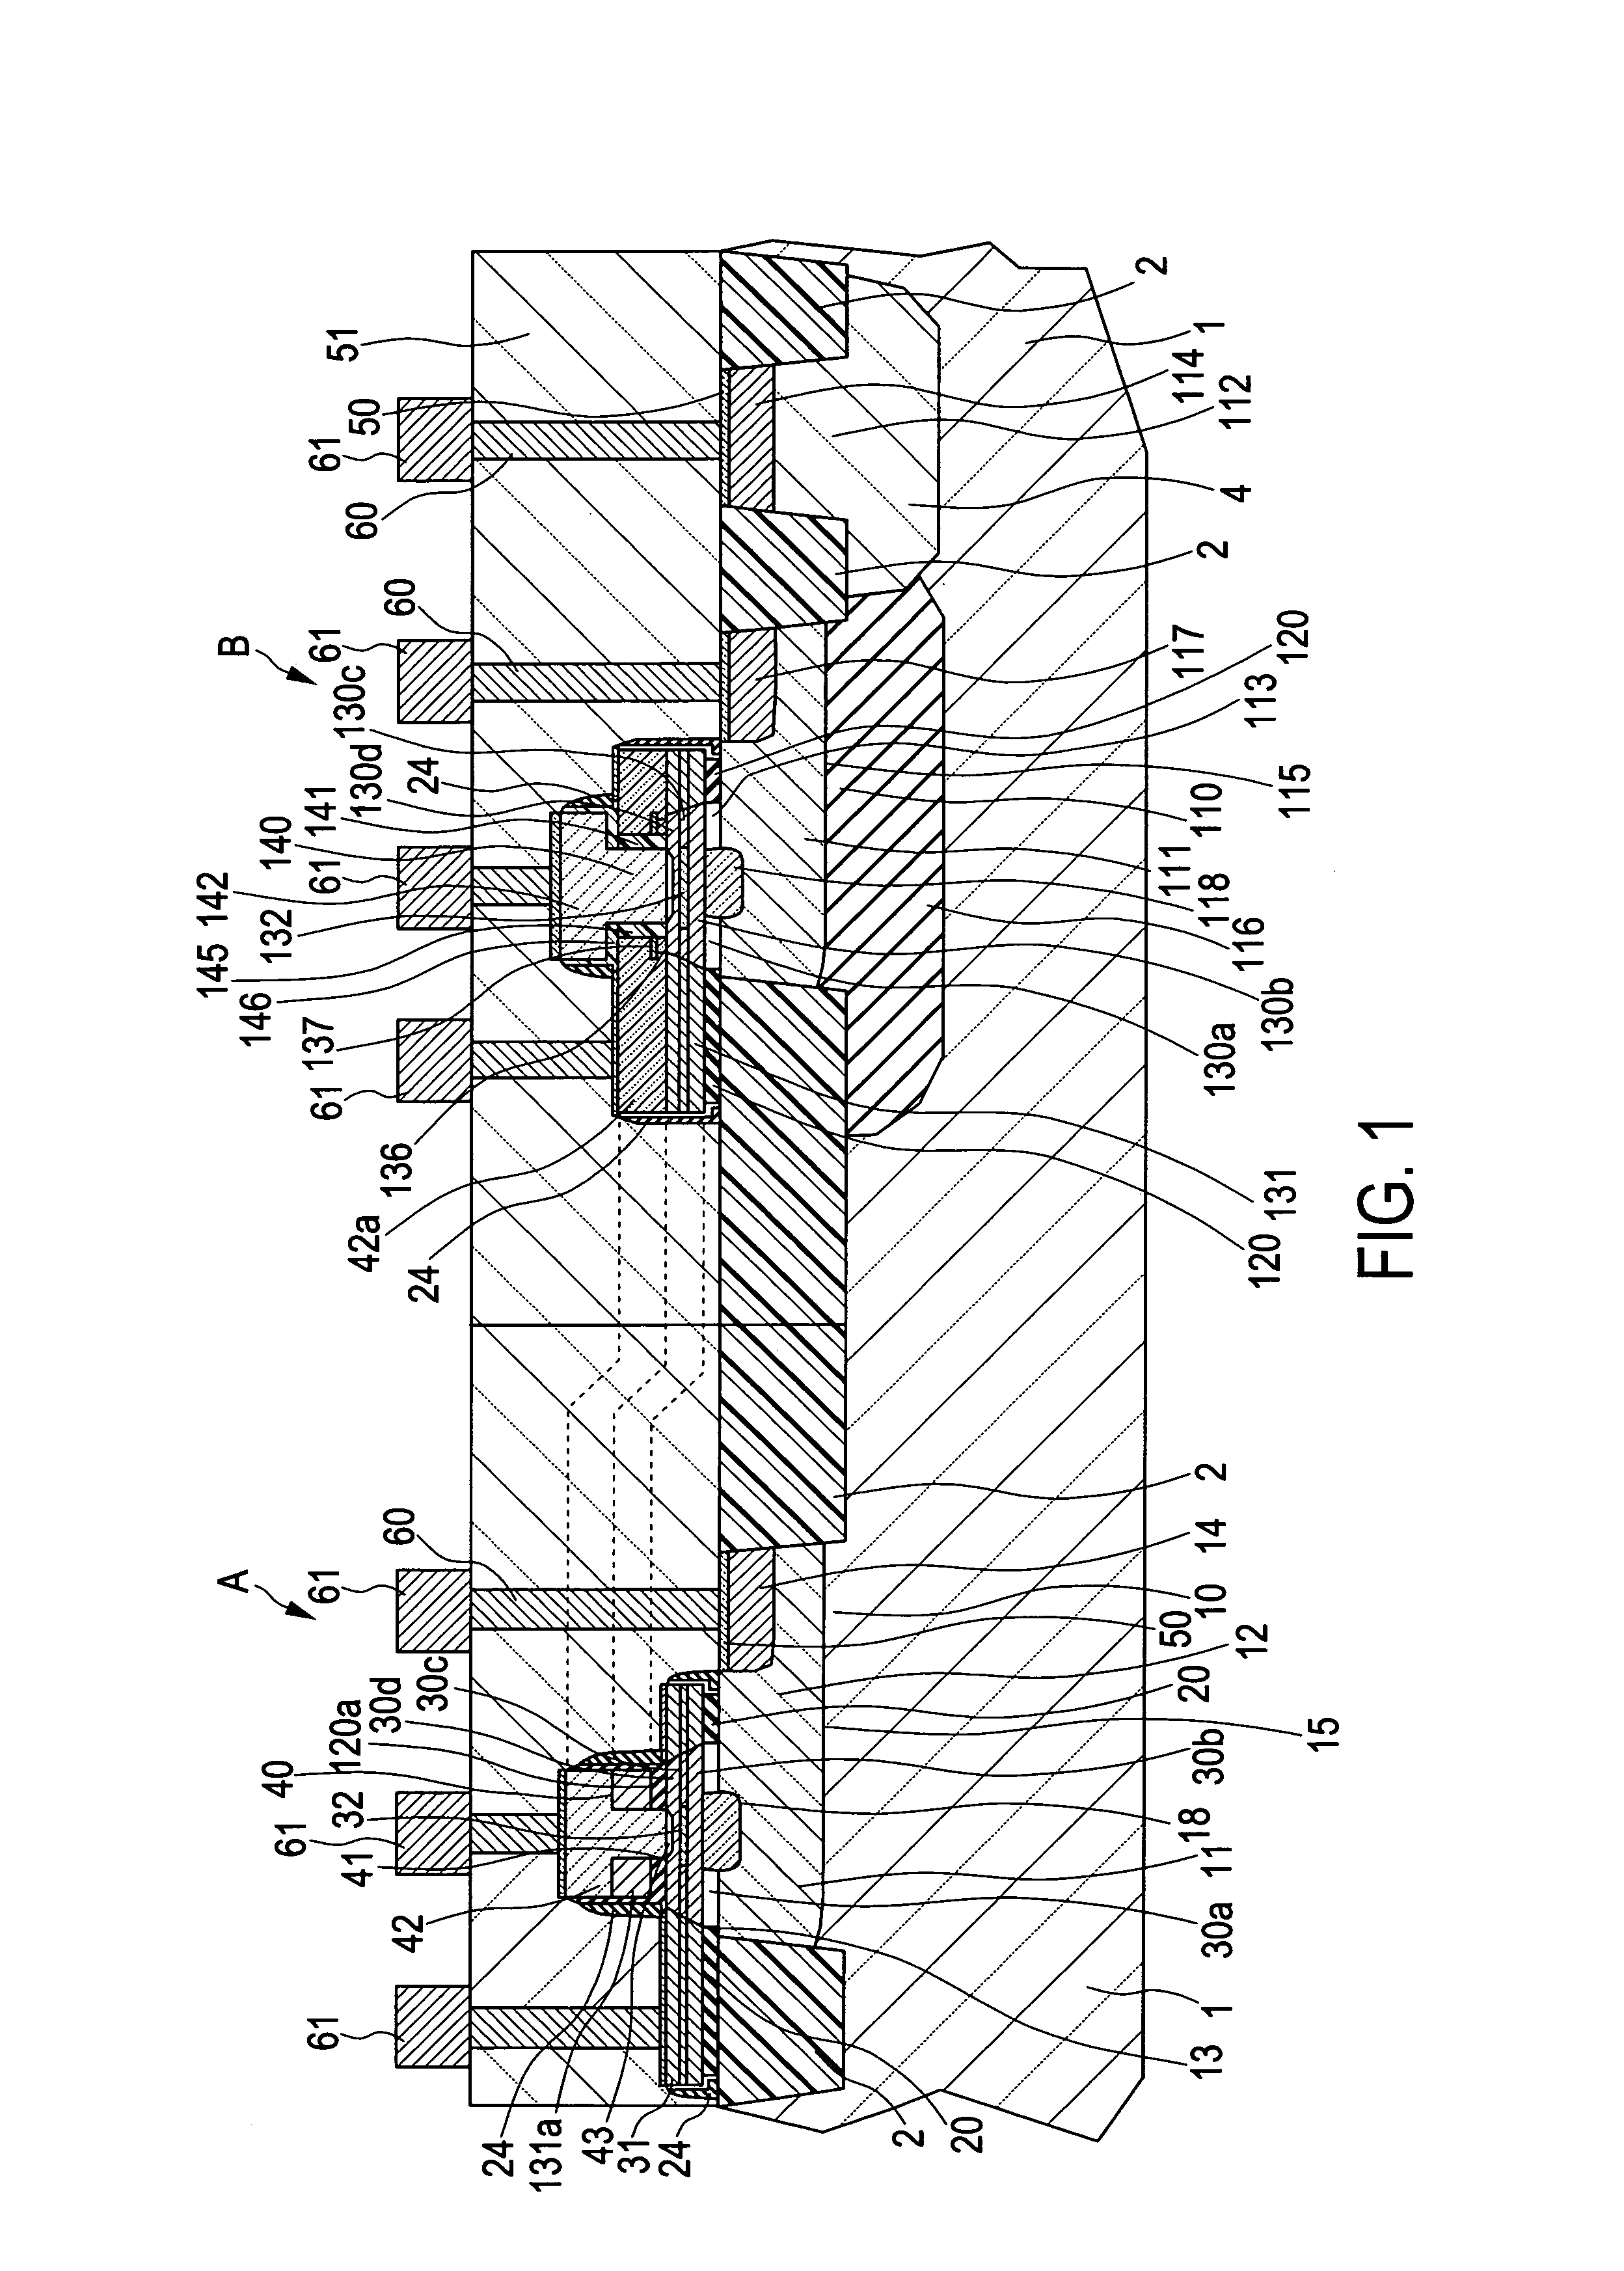 Bipolar complementary semiconductor device